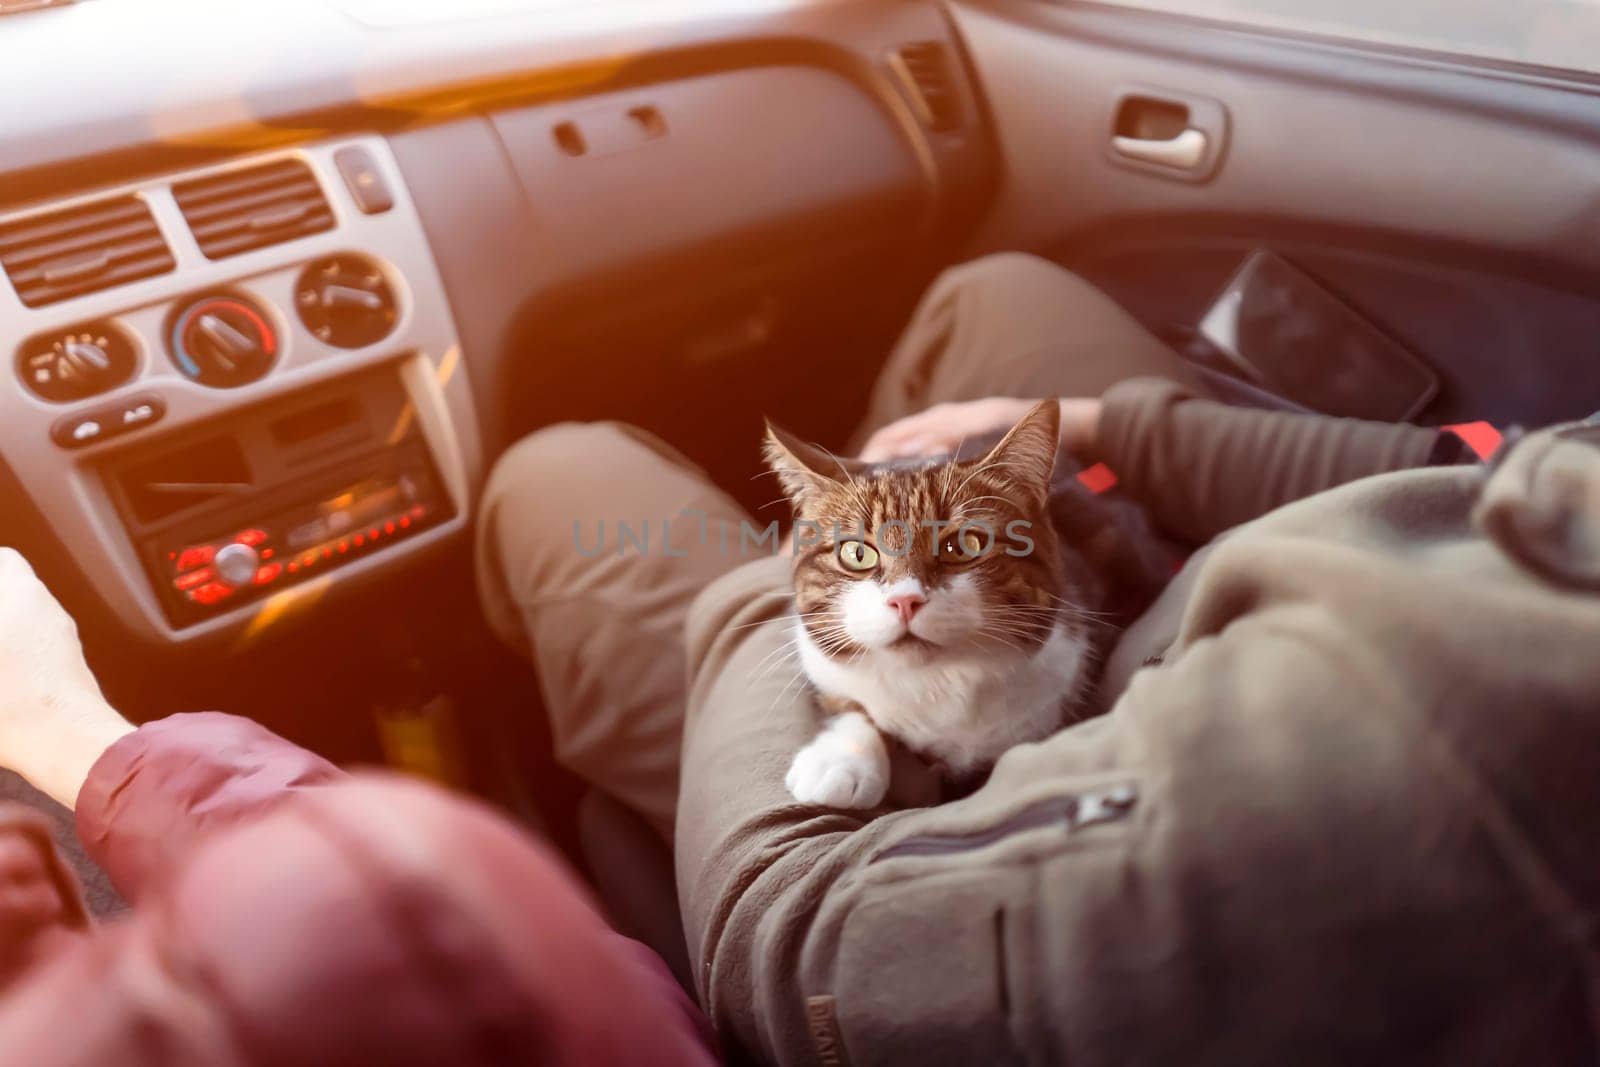 People travel with the beloved cat on a car trip. by africapink